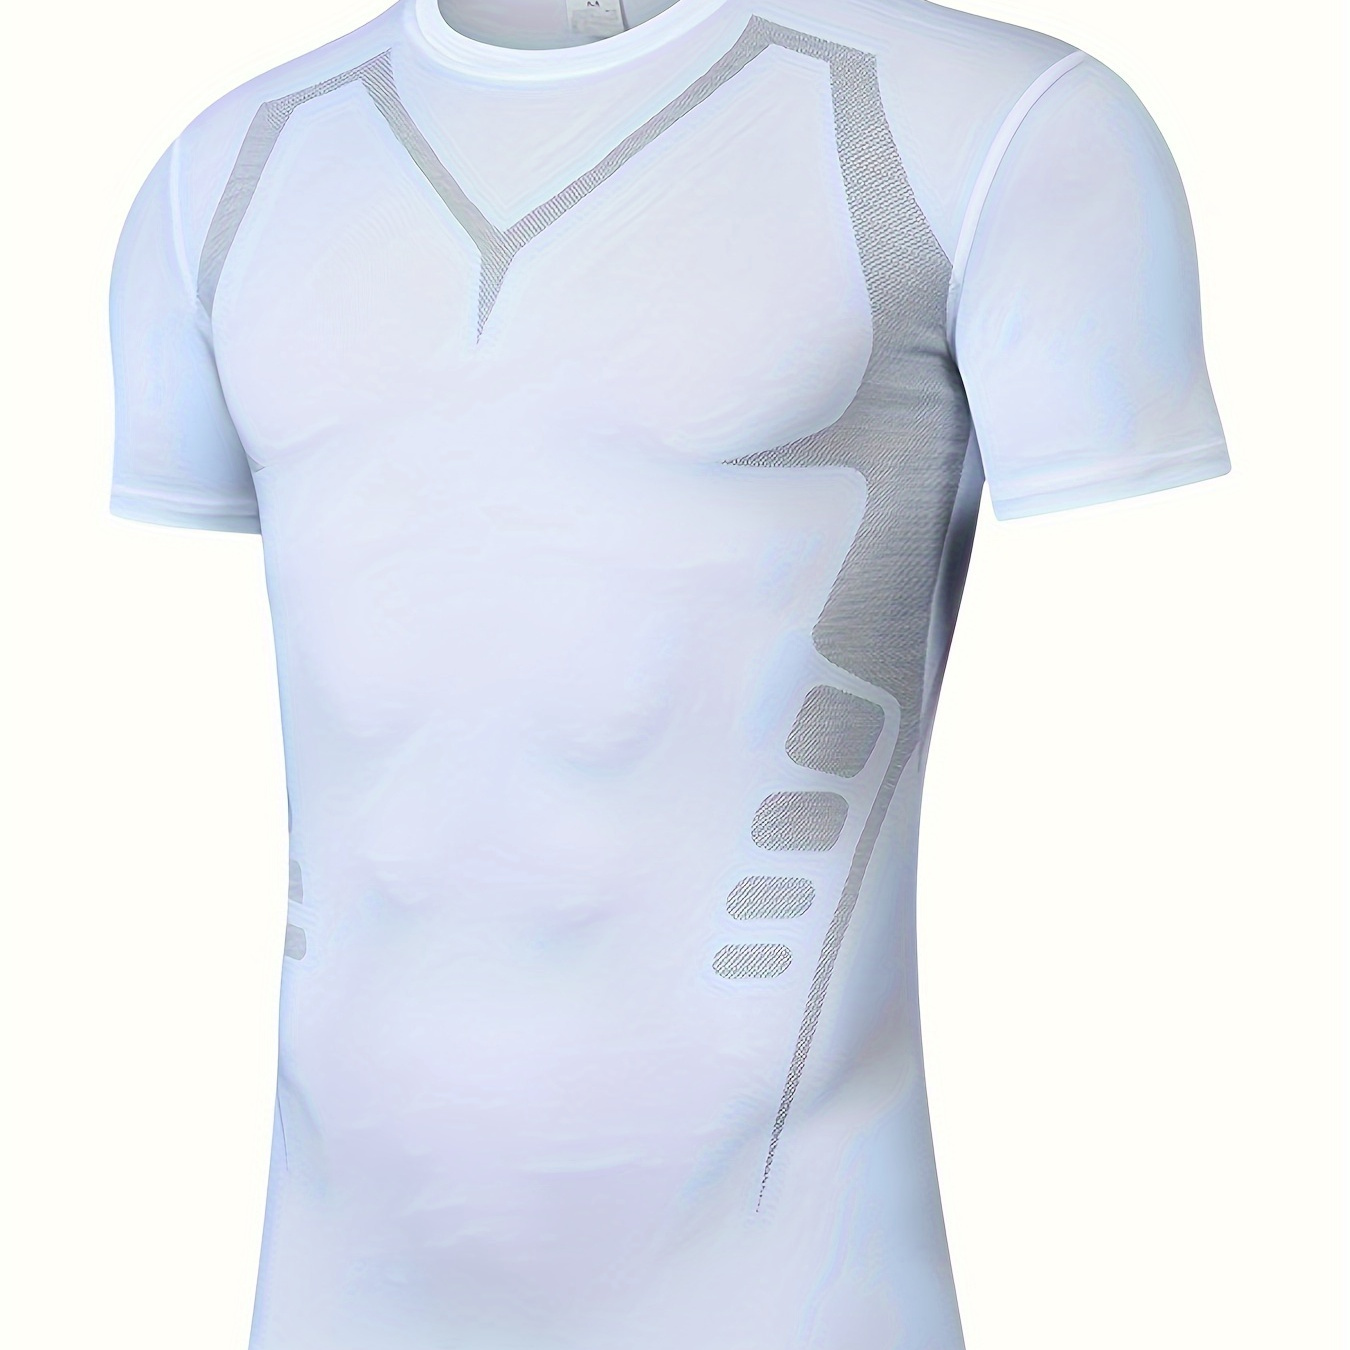 

Men's Athletic Muscle Fit T-shirt, Men's Compression T-shirt, Breathable Comfy Top For Running, Shaping, And Cycling